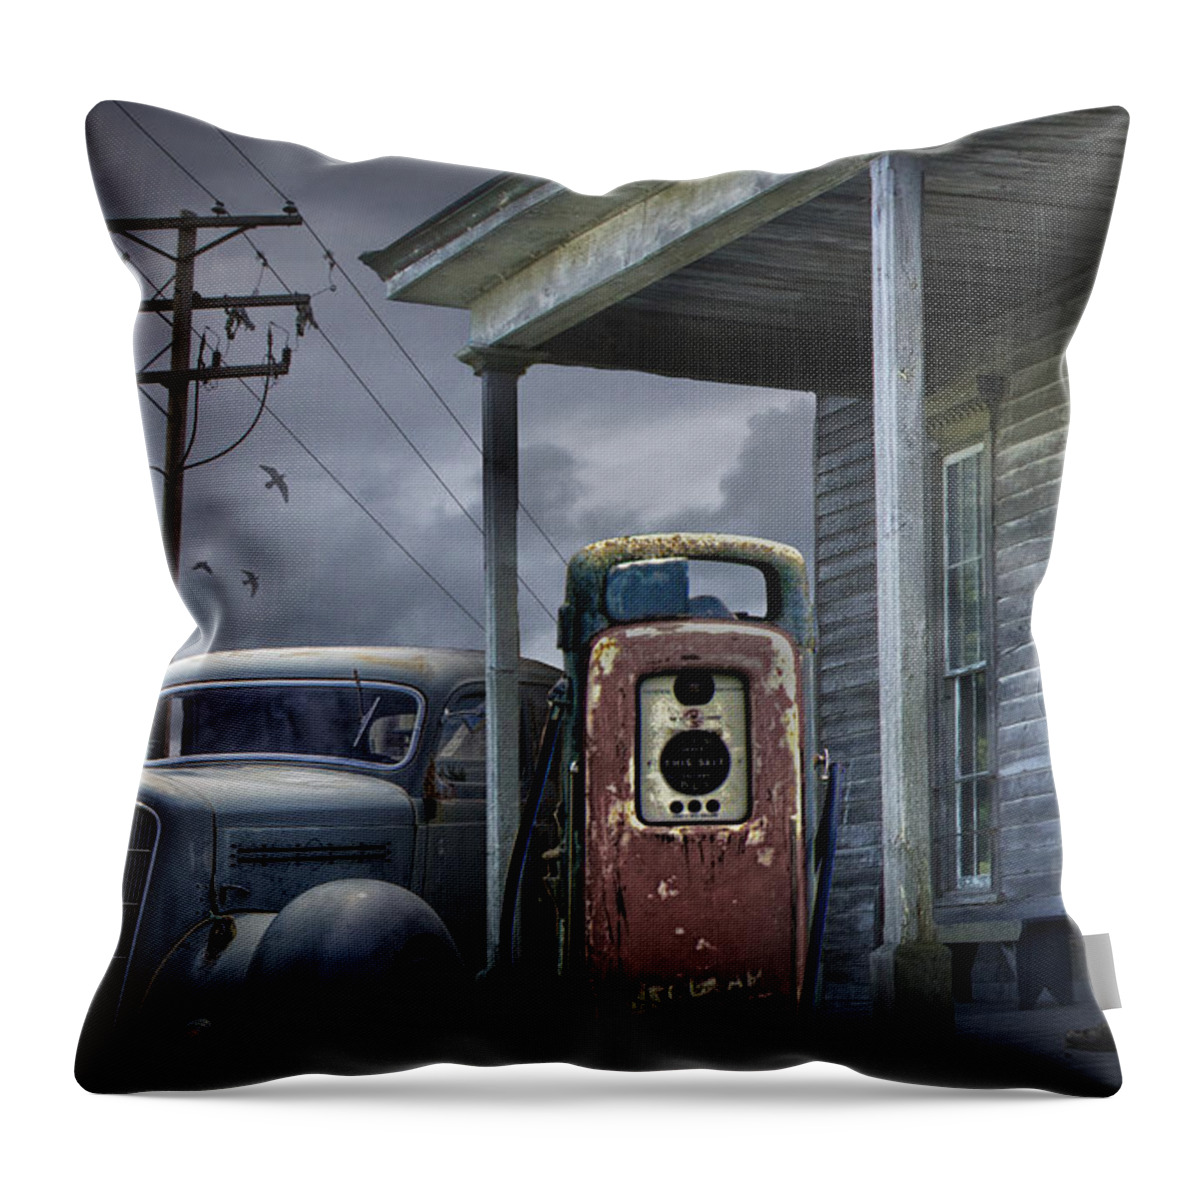 Art Throw Pillow featuring the photograph Man lost in thought by the Vintage Gas Station by Randall Nyhof